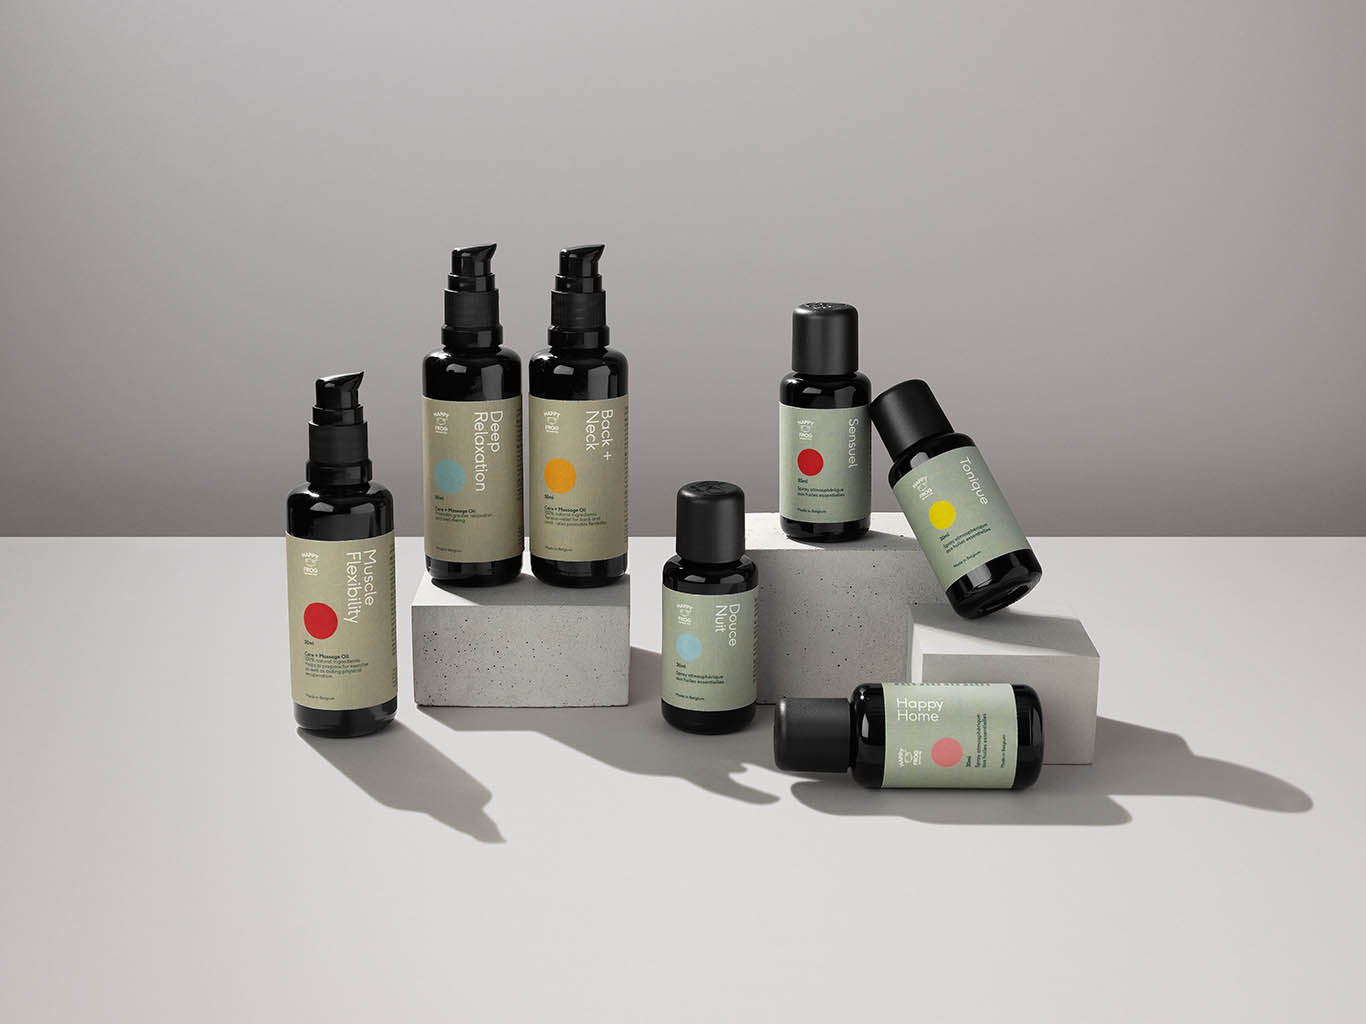 Cosmetics Photography of Happy Frog natural care oils by Packshot Factory